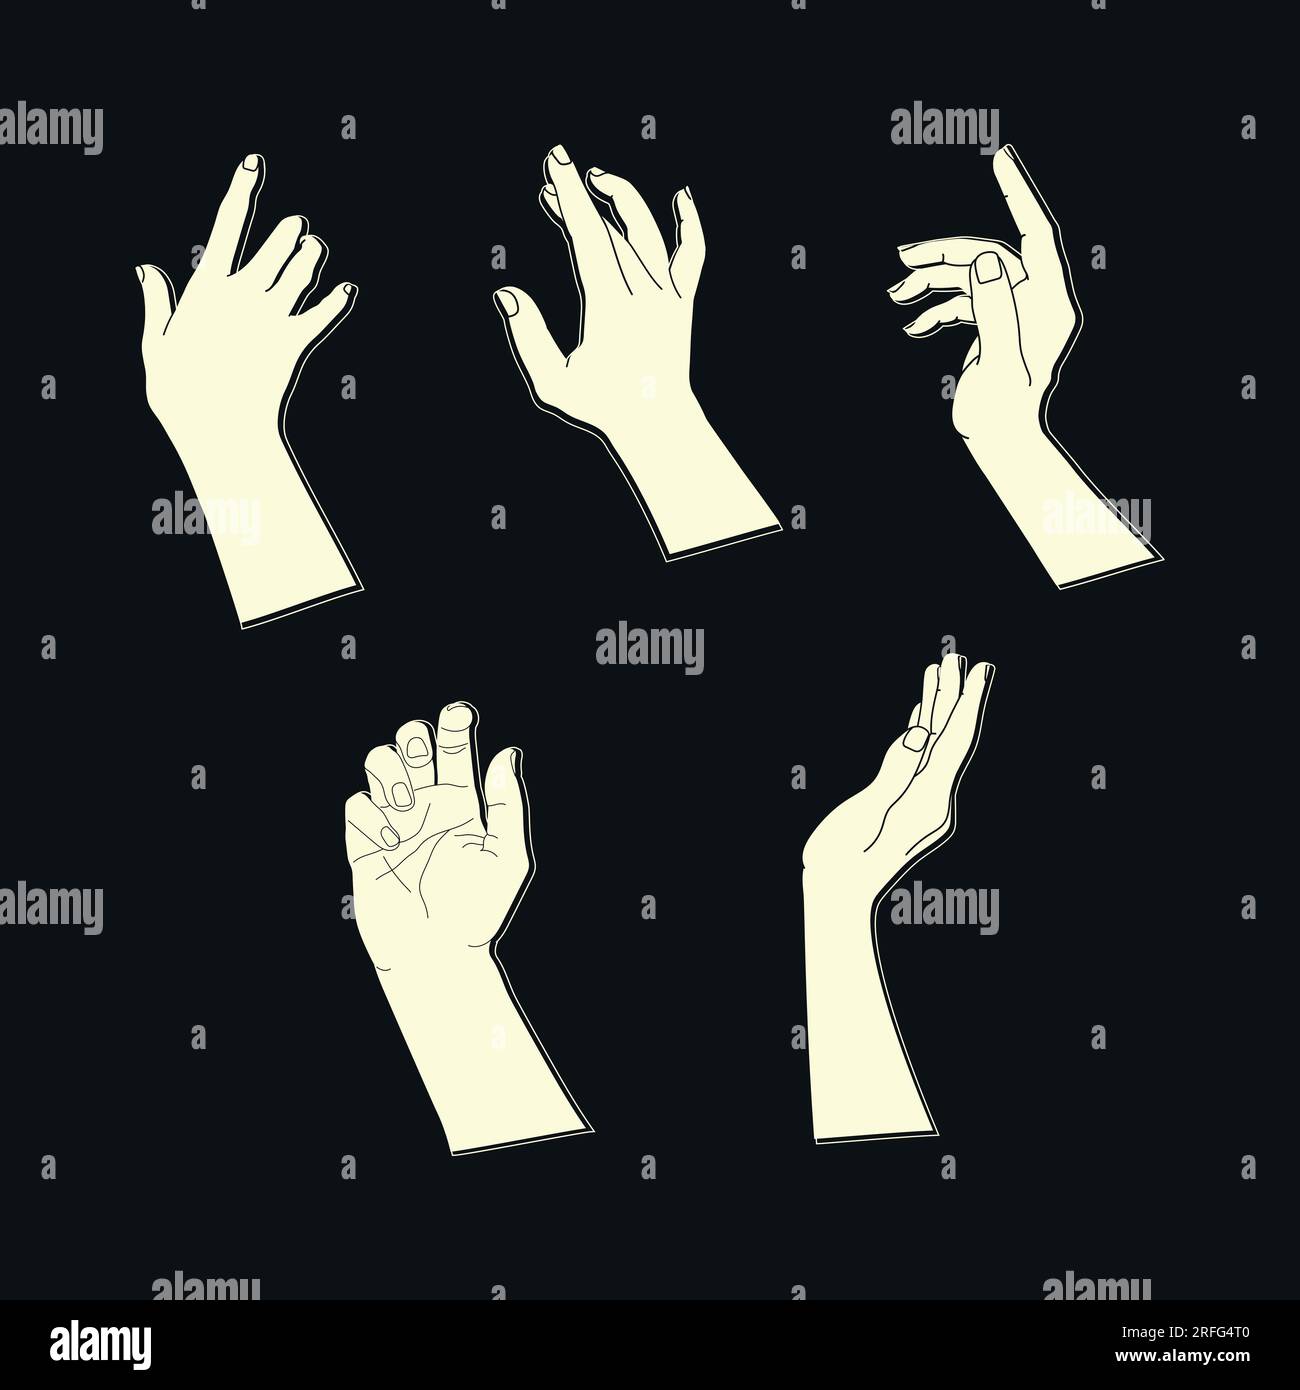 hand gesture references by cakesniffer2000 on DeviantArt | Hand reference,  Hand drawing reference, Art reference poses